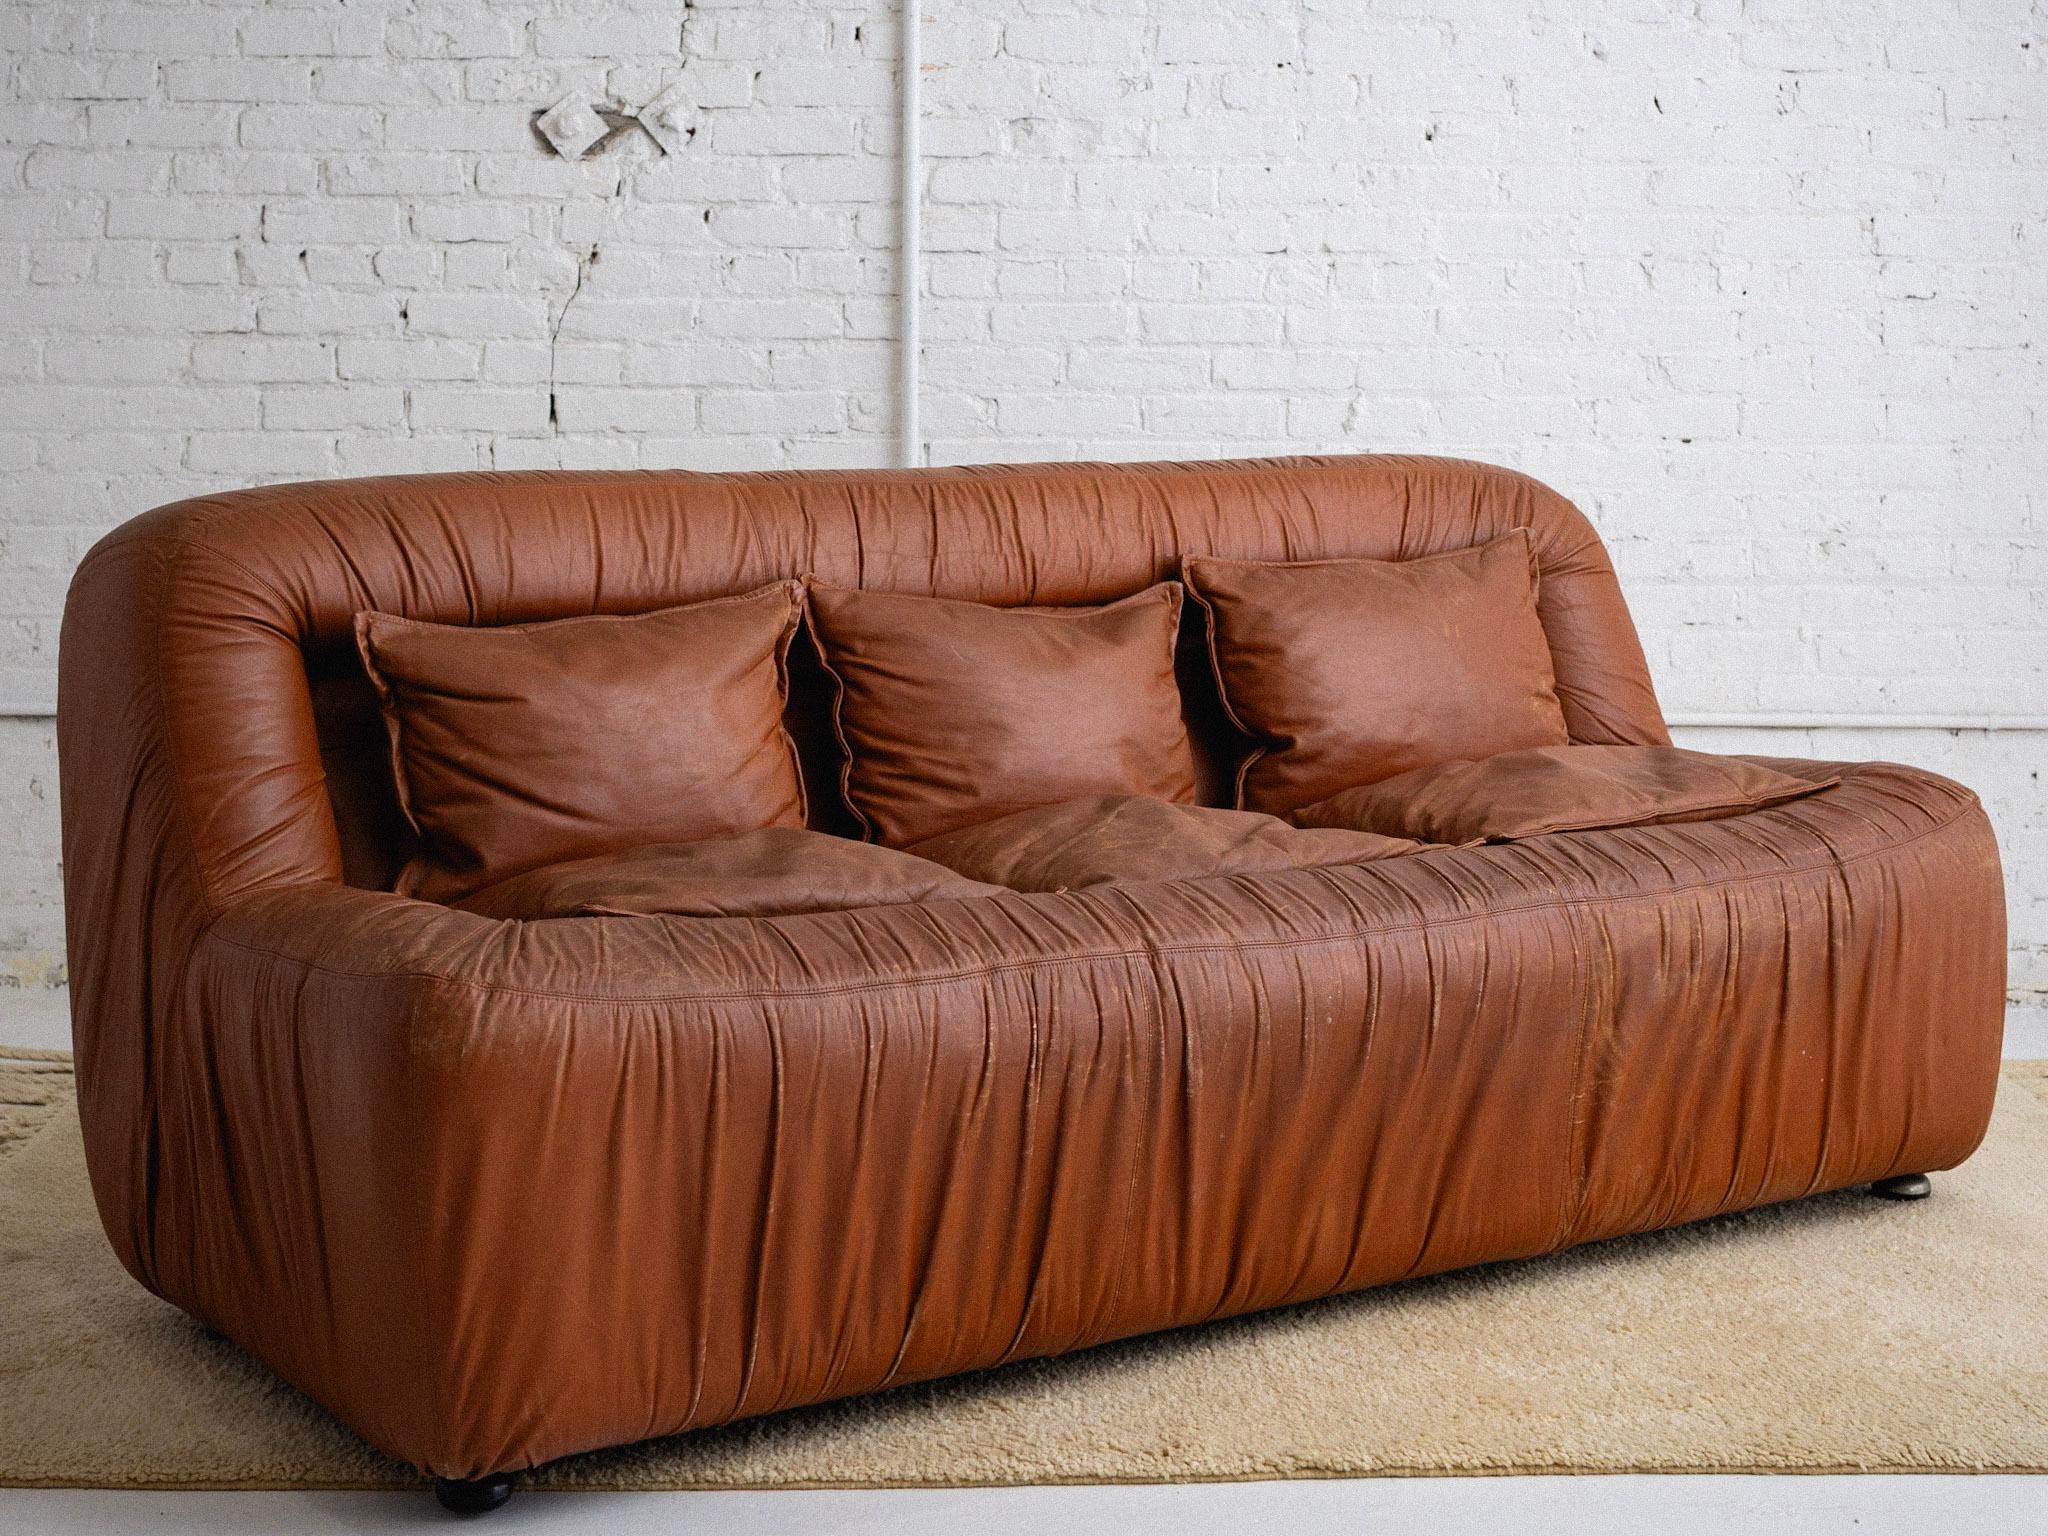 A space age Italian leather sofa in the style or De Pas, D'Urbino, Lomazzi. Rushed camel leather. Three removable upper cushions. Two chairs and one sofa available, sold separately. Sourced in Northern Italy. 